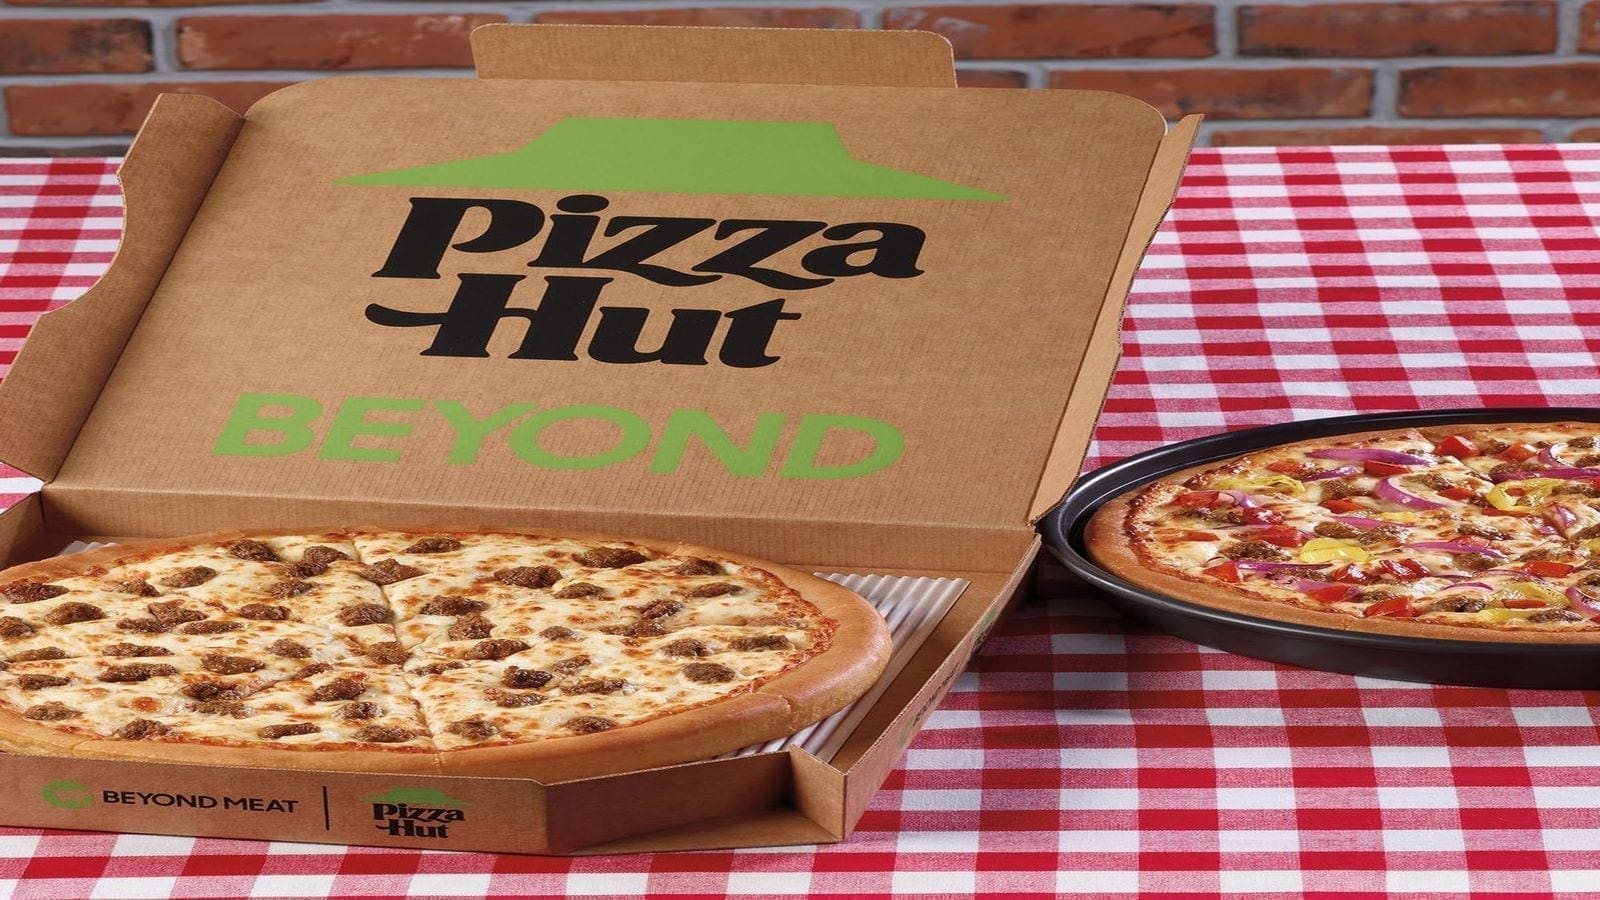 Pizza Hut partners Beyond Meat to roll out sausage alternative across restaurant in US